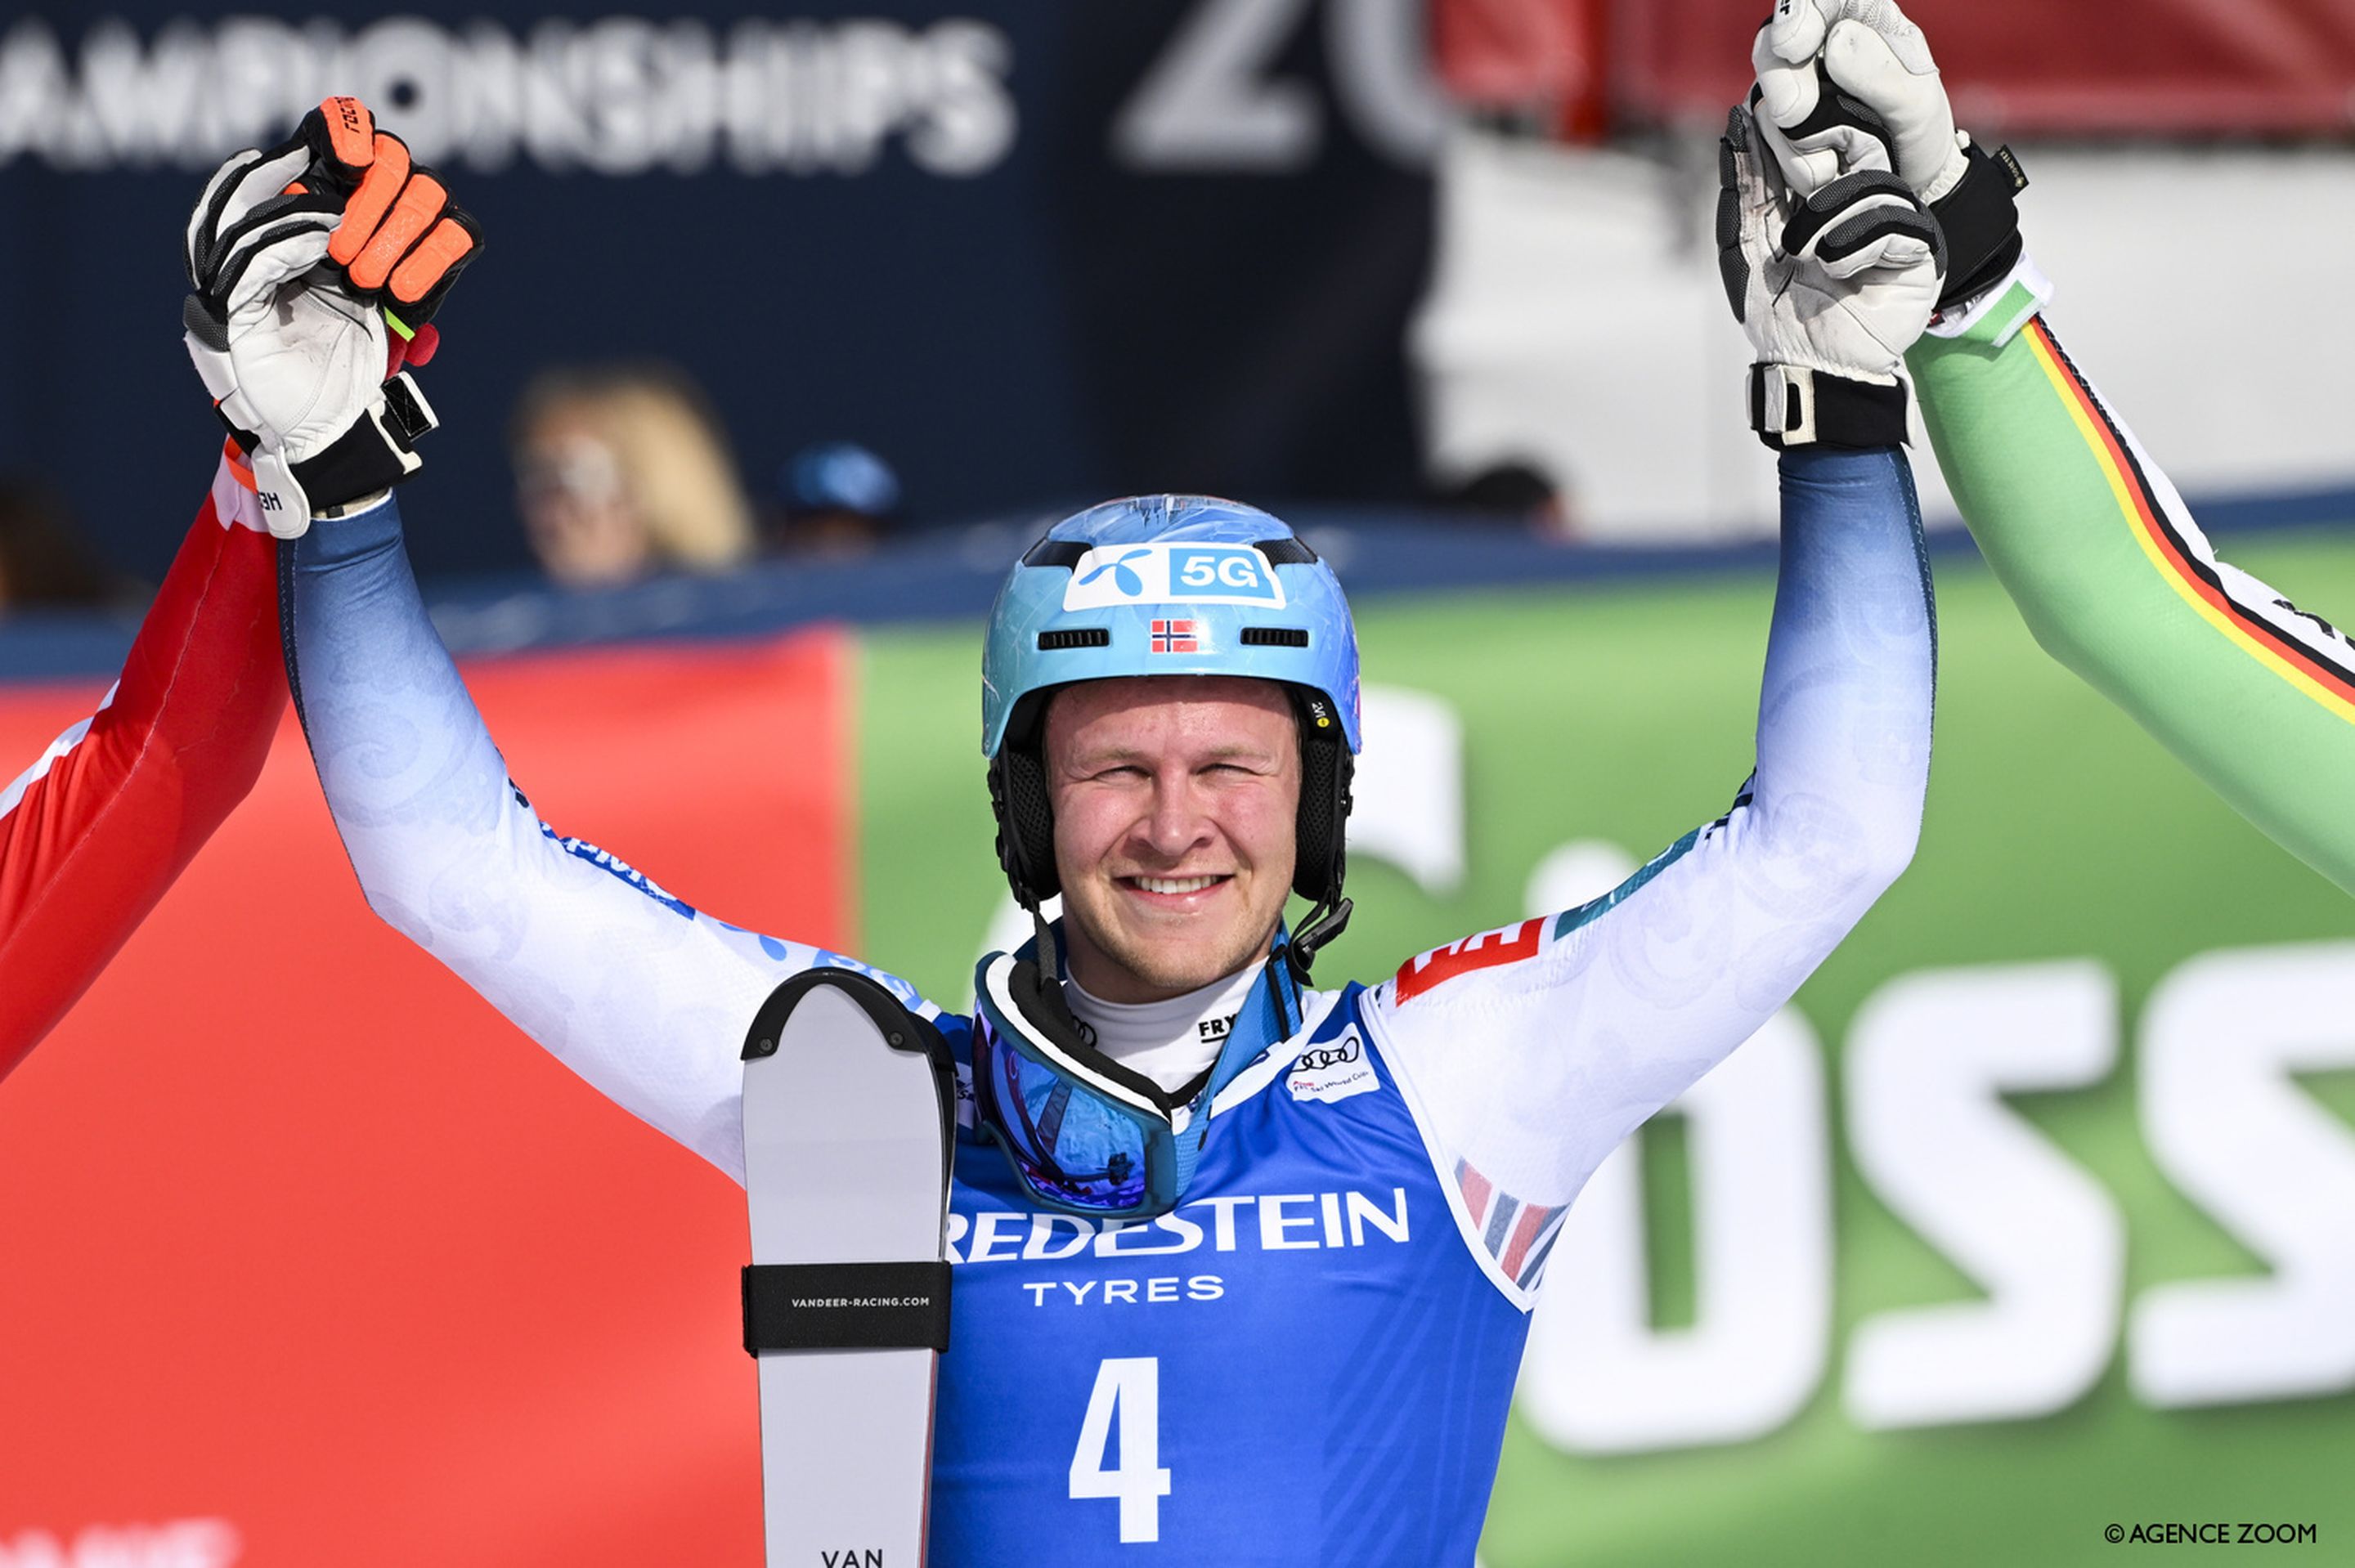 Haugan stands on top of the podium for the first time in his World Cup career